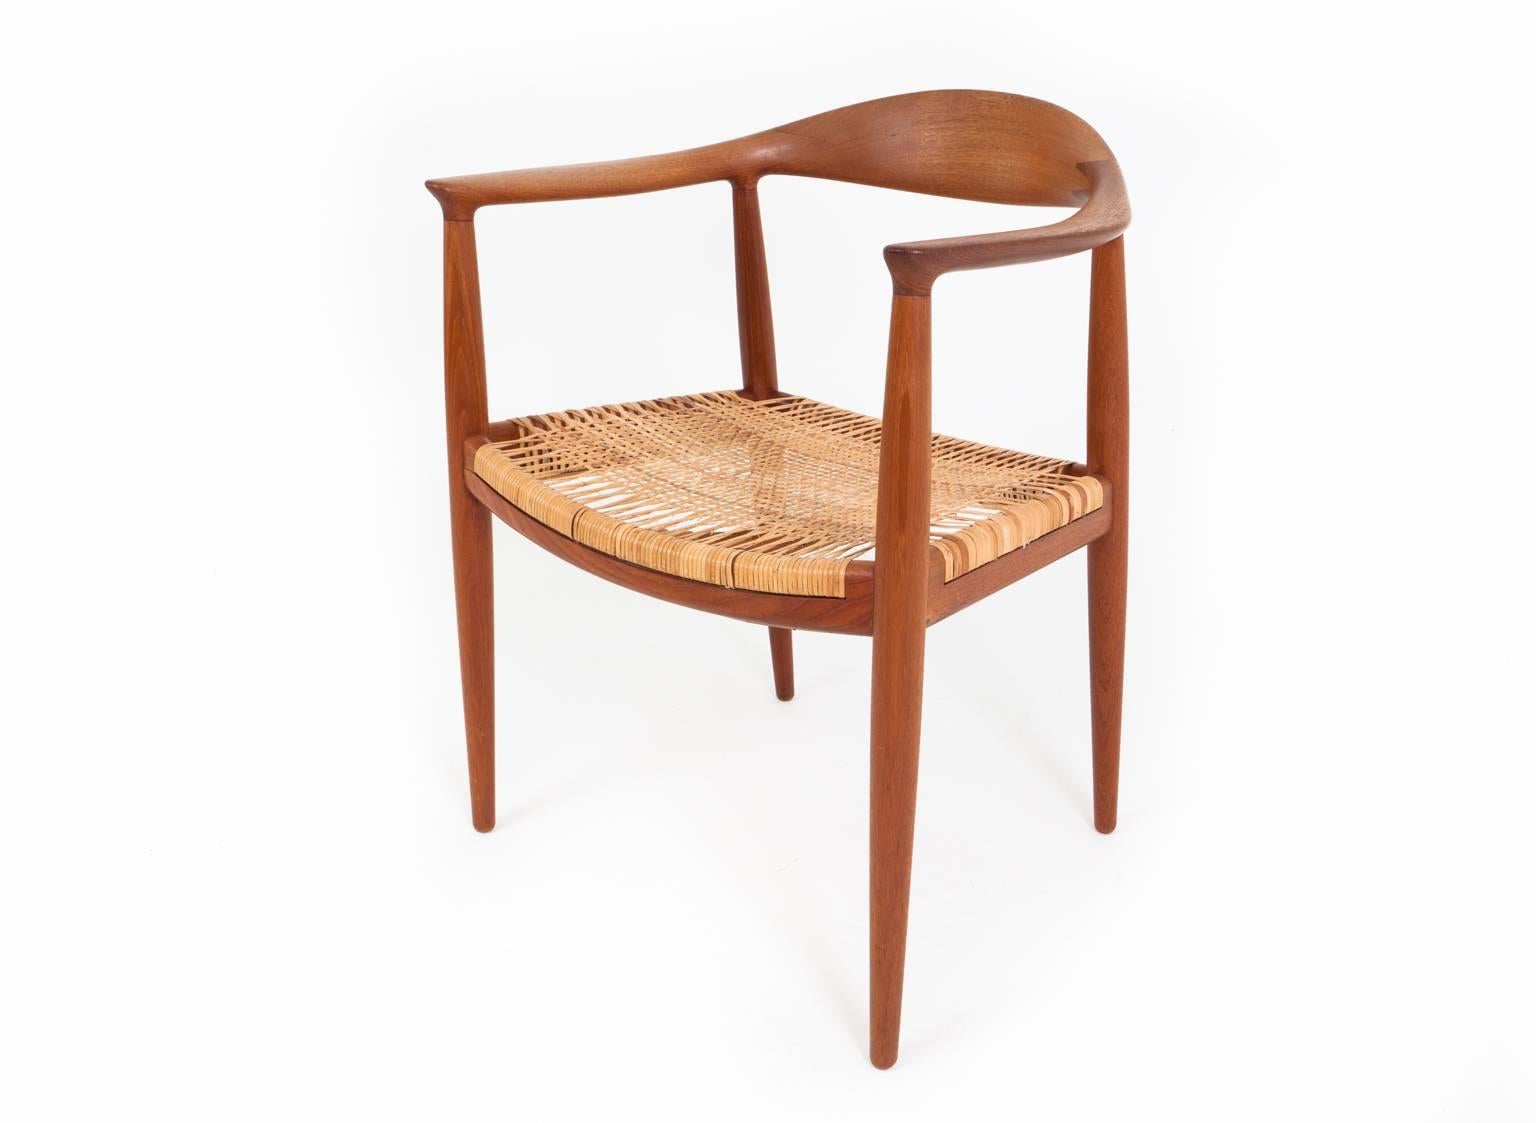 Hans J. Wegner

The chair
Oak armchair. Seat with woven cane. 

Model JH 501
Manufactured and stamped by cabinetmaker Johannes Hansen, Copenhagen
Designed 1949.
          